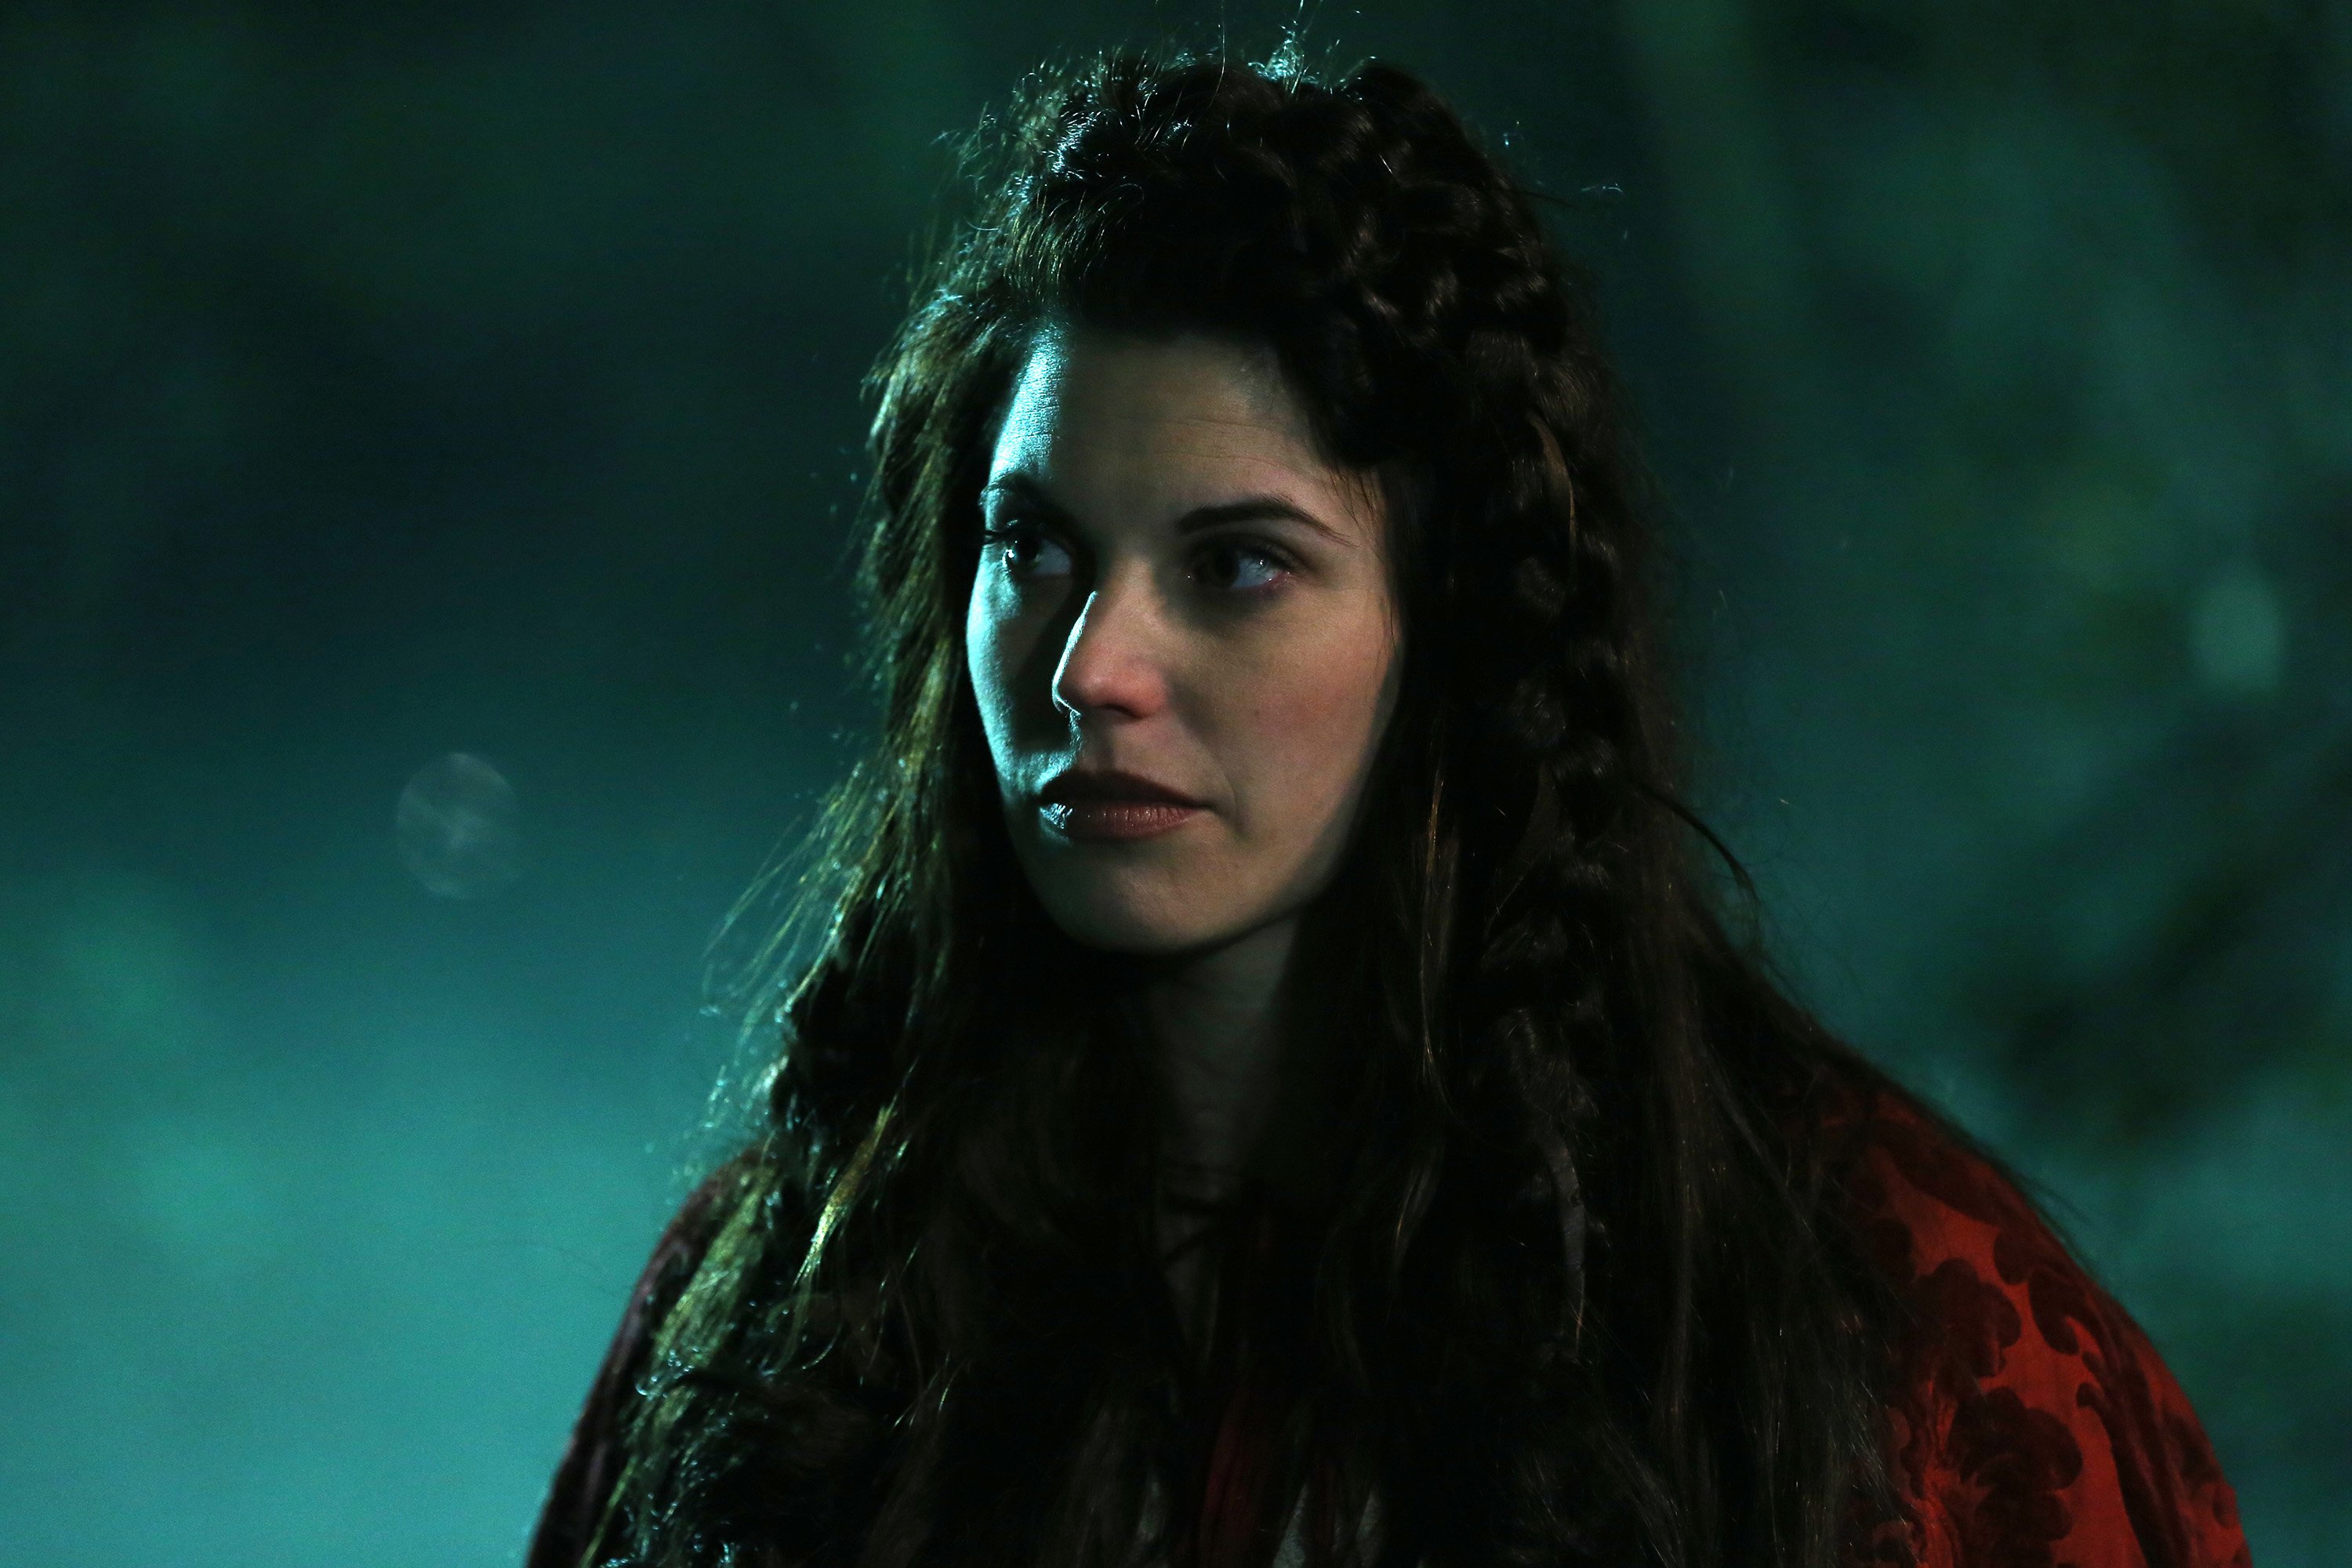 Meghan Ory in costume as Red Riding Hood in 'Once Upon a Time'